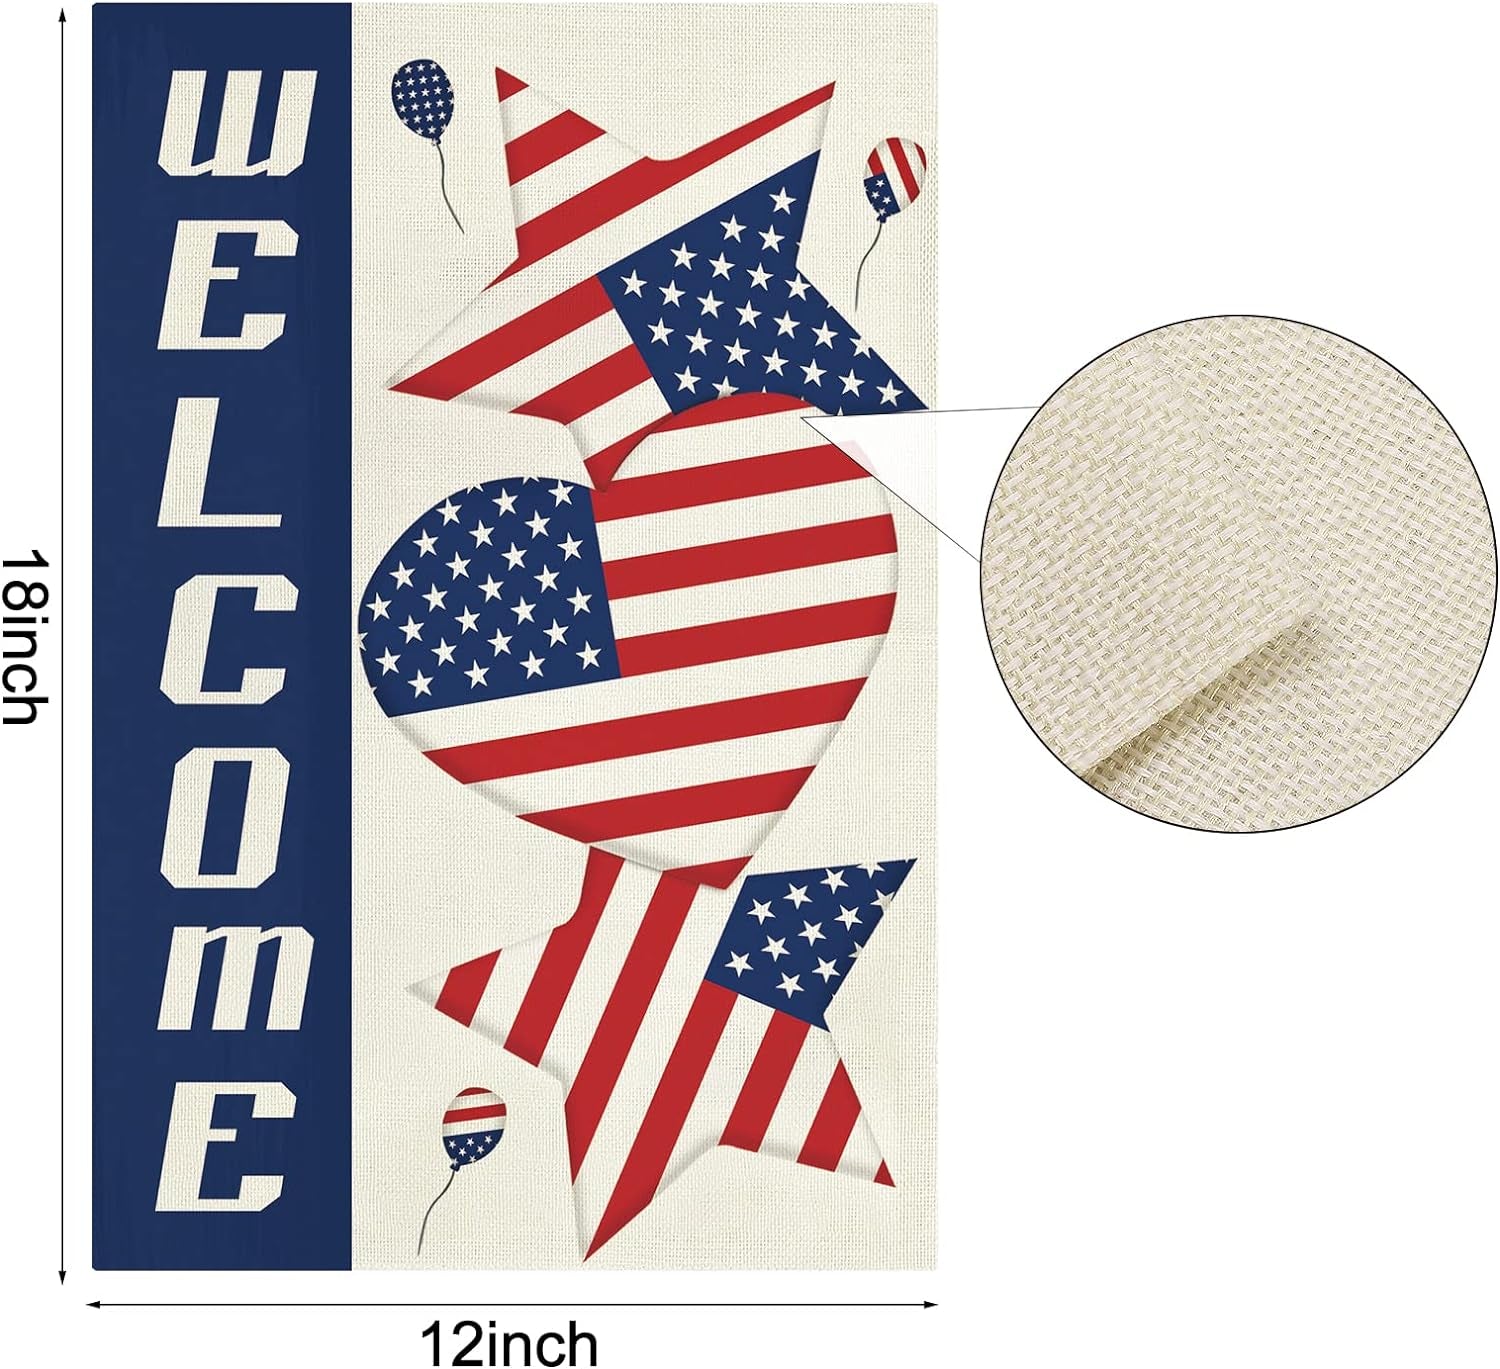 4Th of July Decorations Outdoor, 4Th of July Garden Flag Fourth of July Decorations Patriotic Yard Flag American Flag Double Sided Patriotic Flags Independence Day Yard Outdoor Flag 12X18 Inch